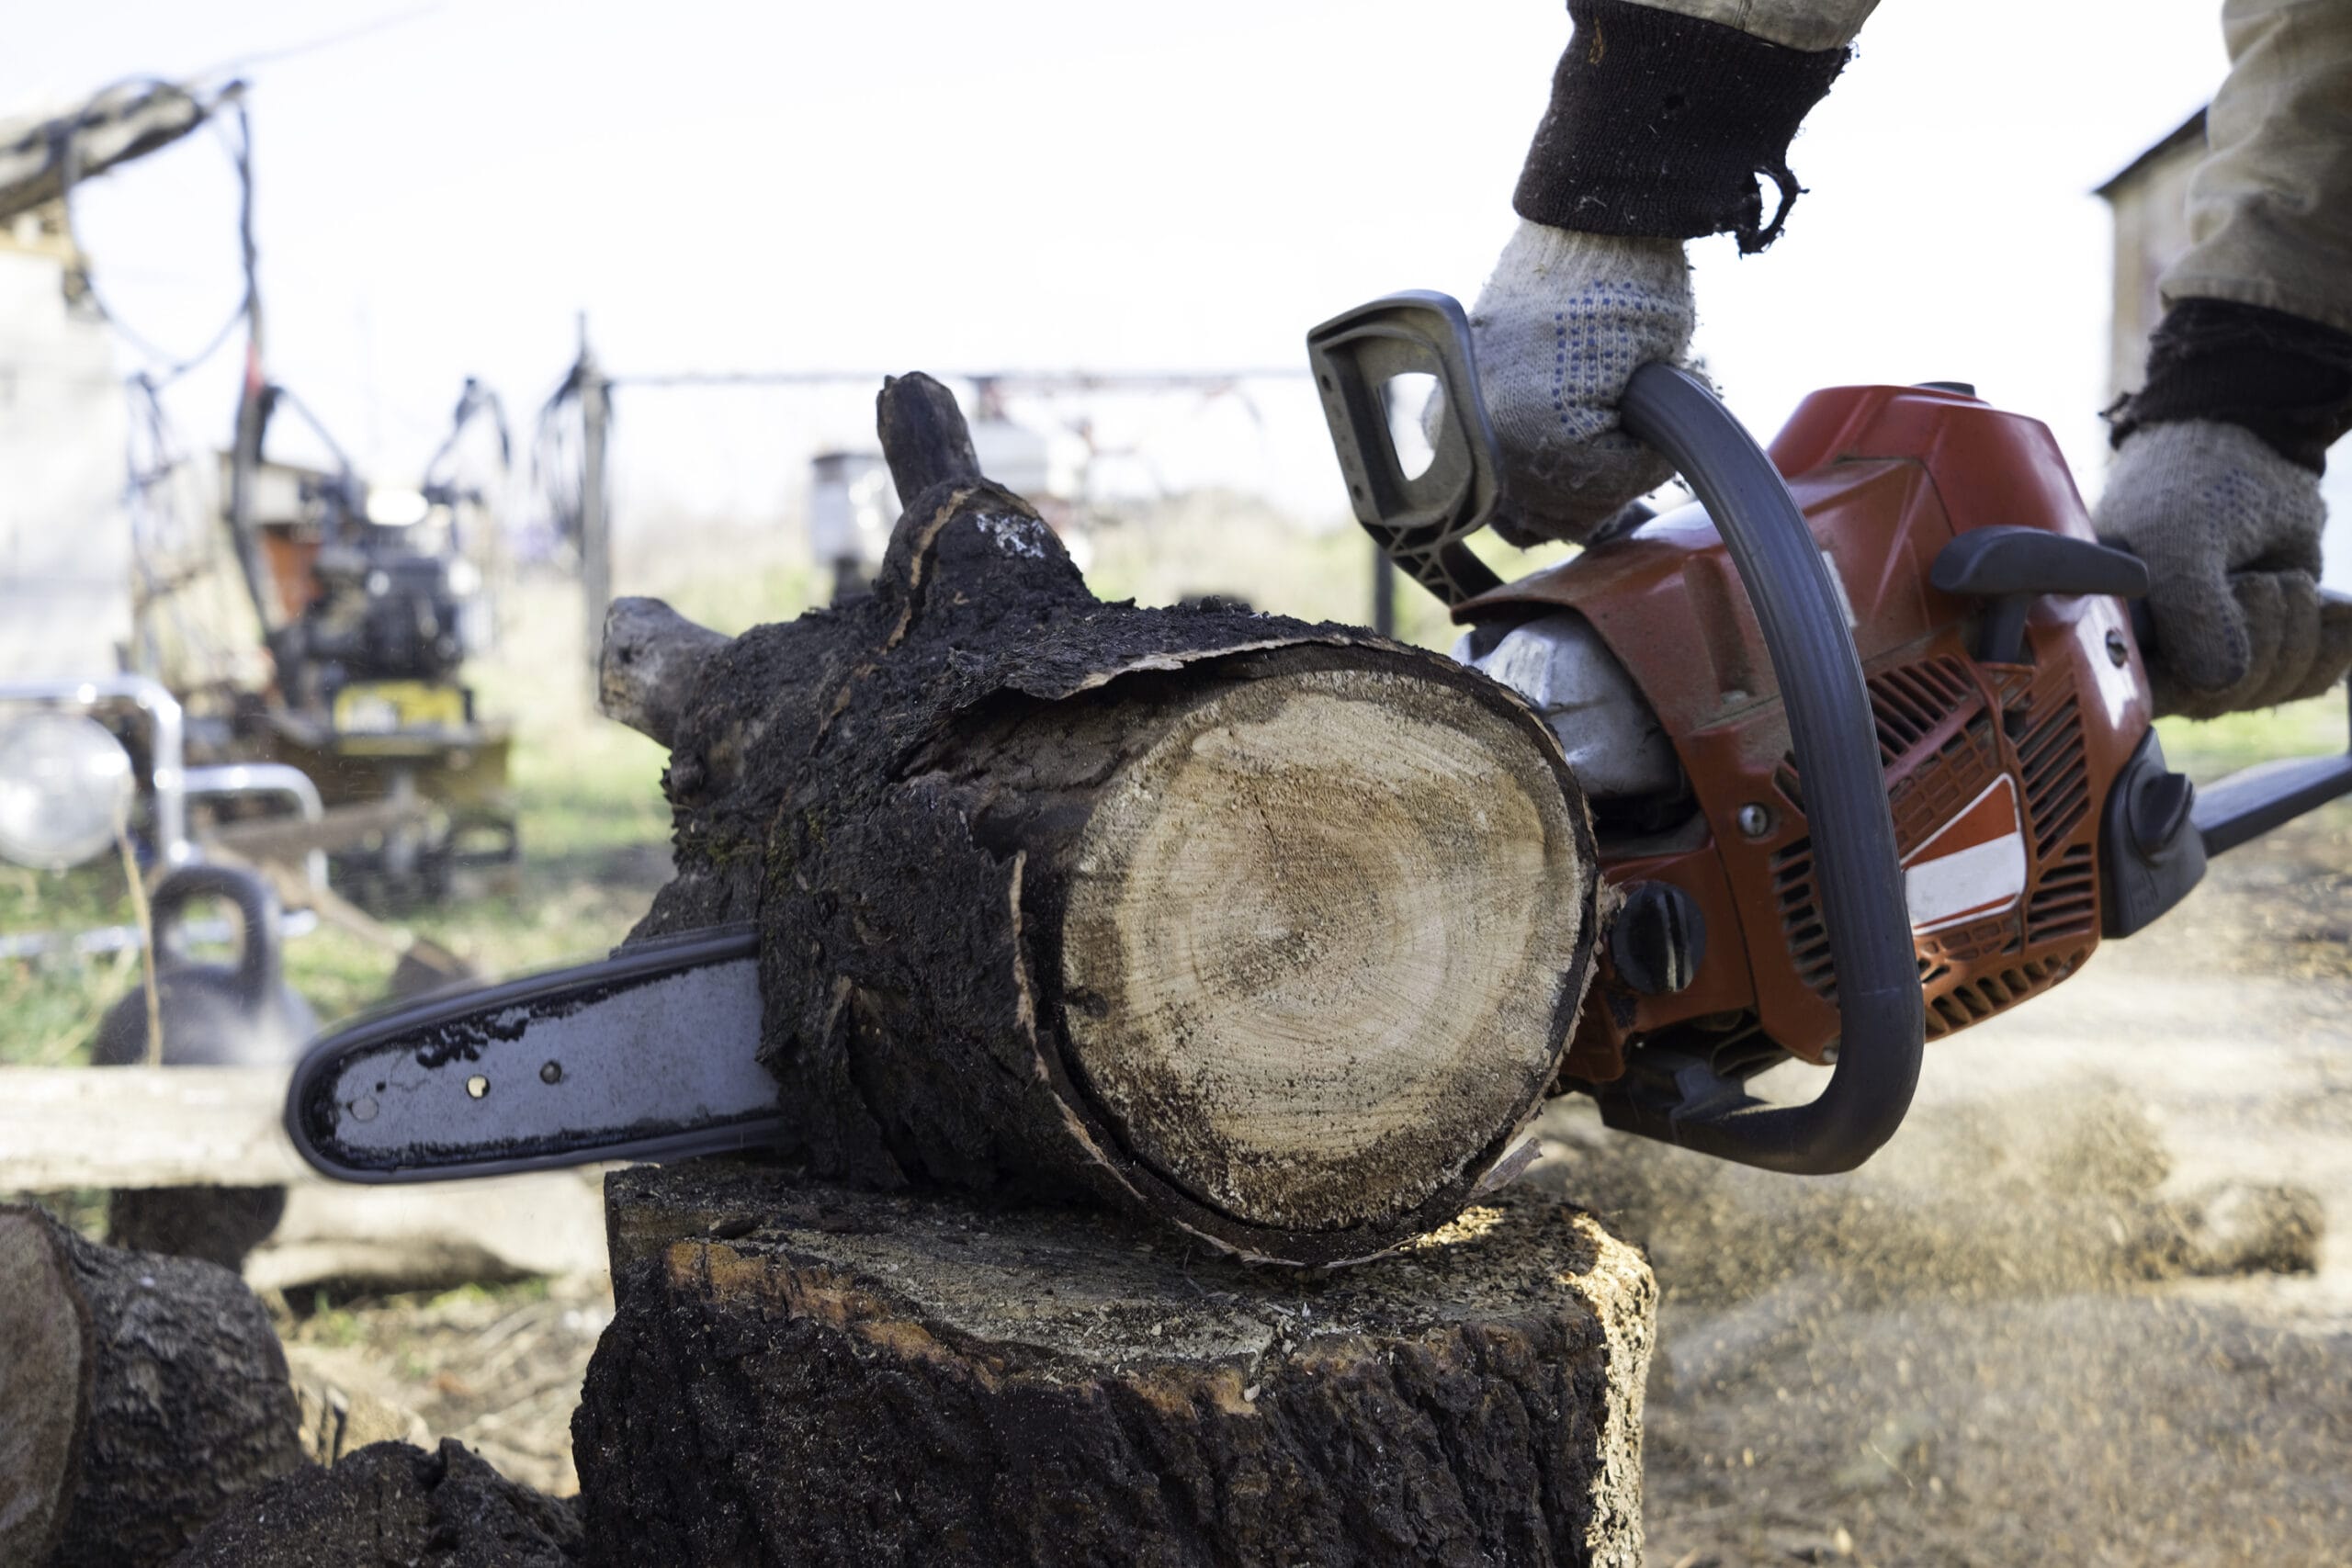 FWPCOT2259 - Cut Materials With A Hand-Held Chainsaw